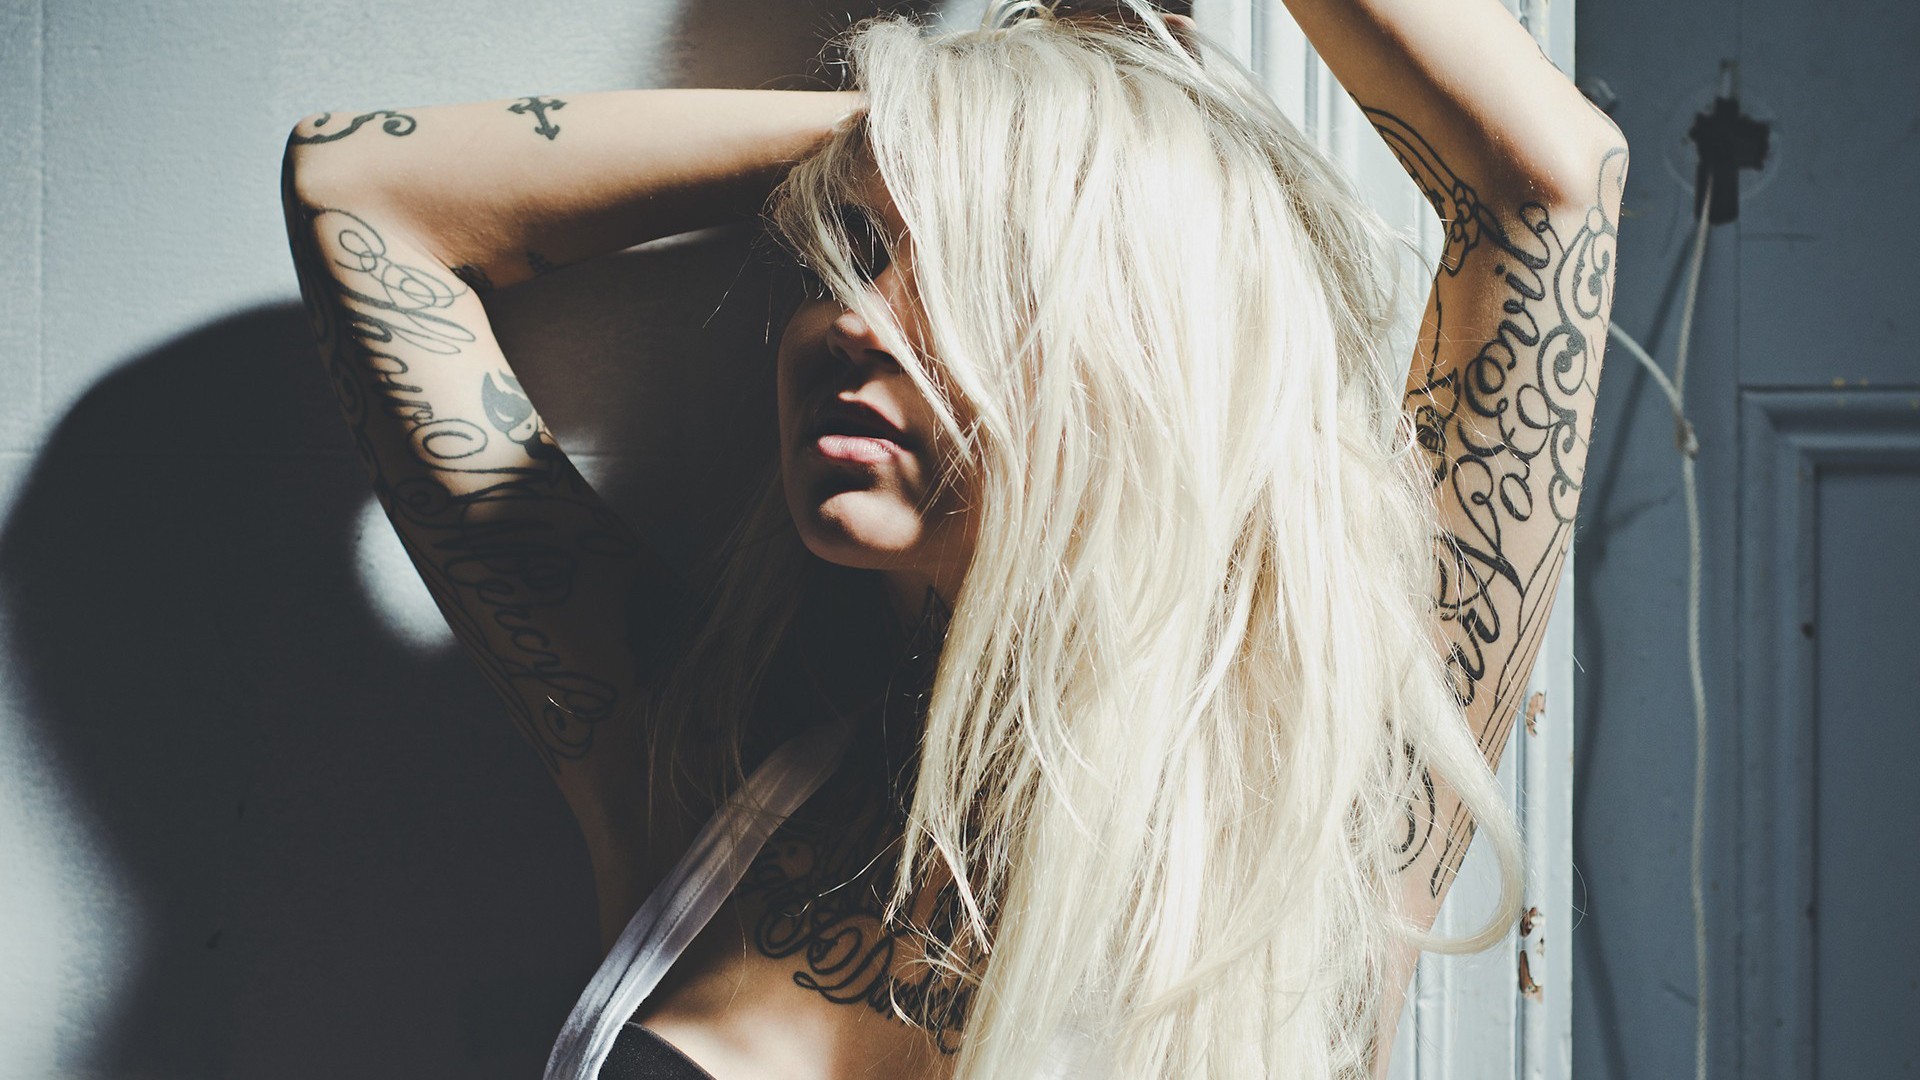 People 1920x1080 Sara Fabel blonde tattoo women model inked girls arms up face hair over one eye women indoors indoors